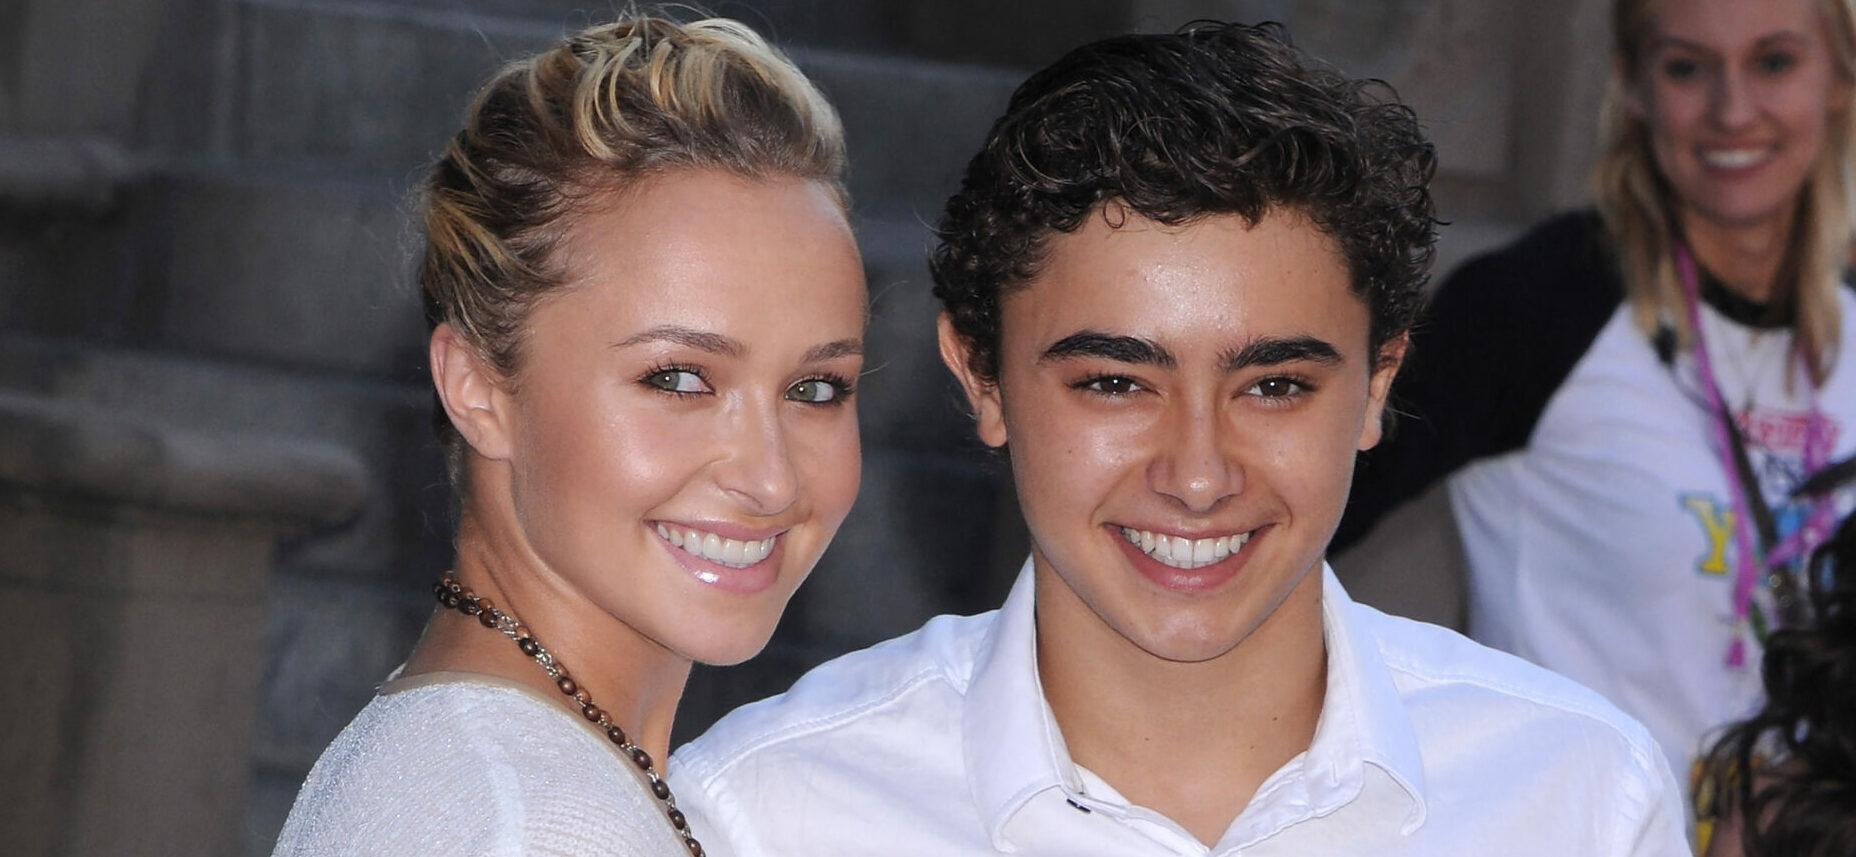 Hayden Panettiere and late brother Jansen Panettiere